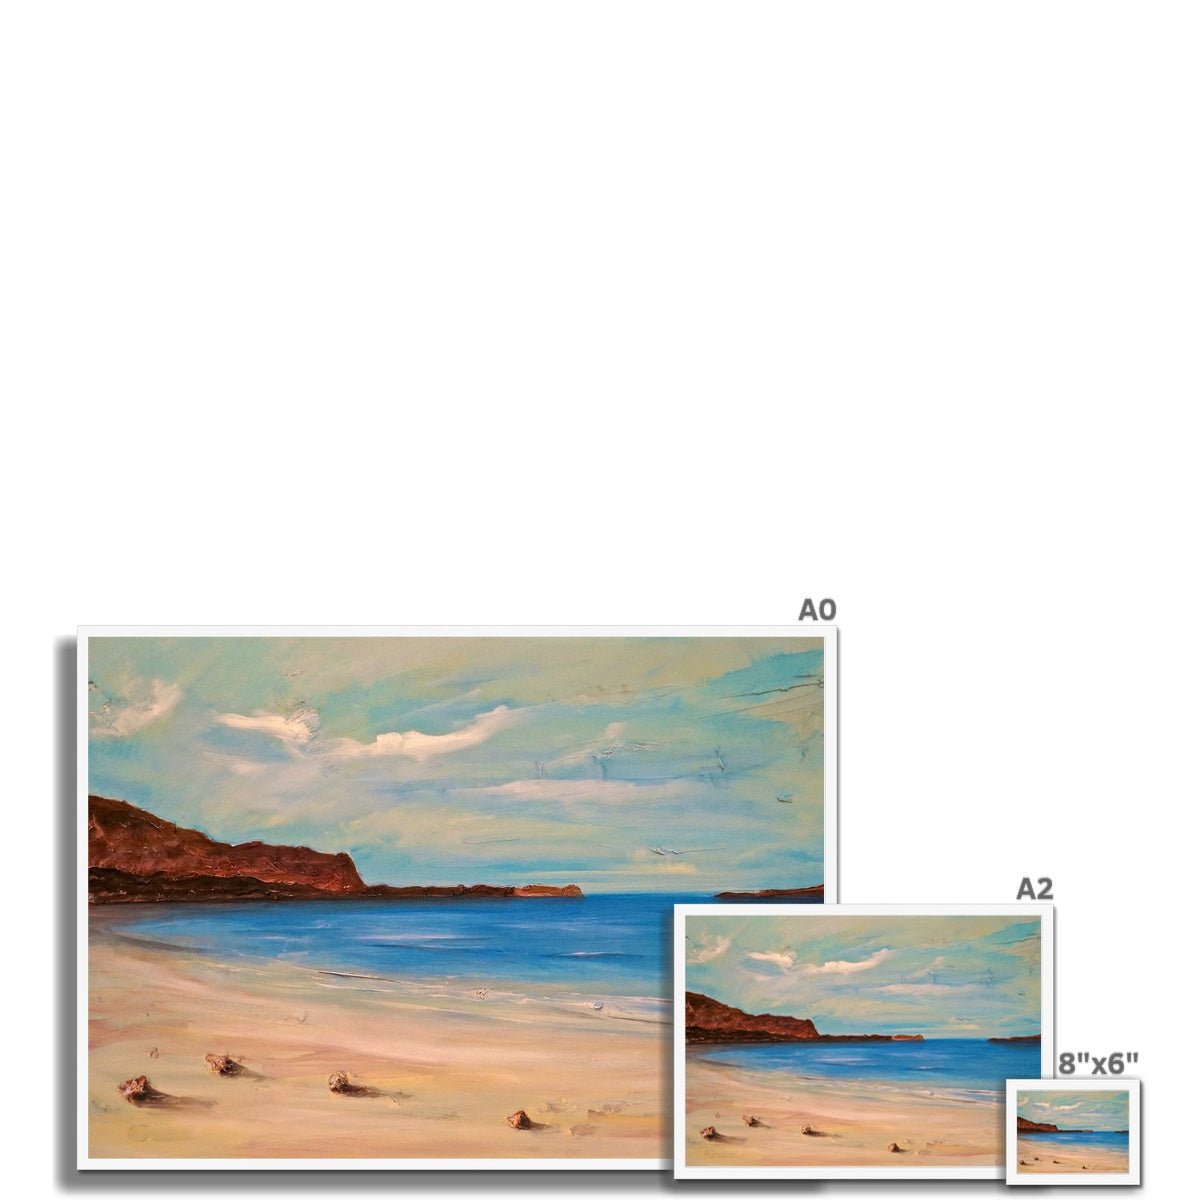 Bosta Beach Lewis Painting | Framed Prints From Scotland-Framed Prints-Hebridean Islands Art Gallery-Paintings, Prints, Homeware, Art Gifts From Scotland By Scottish Artist Kevin Hunter